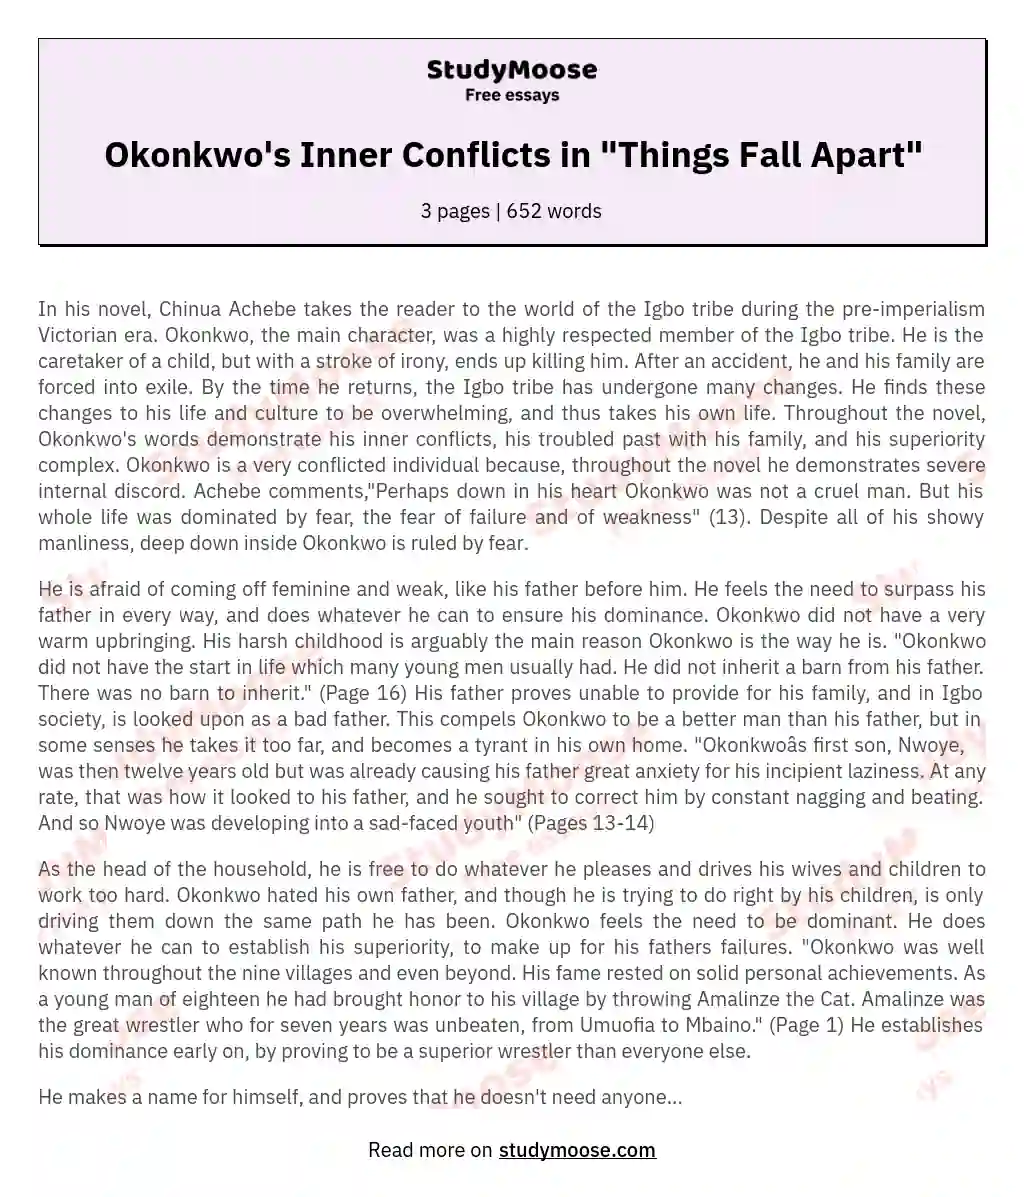 Okonkwo's Inner Conflicts in "Things Fall Apart" essay